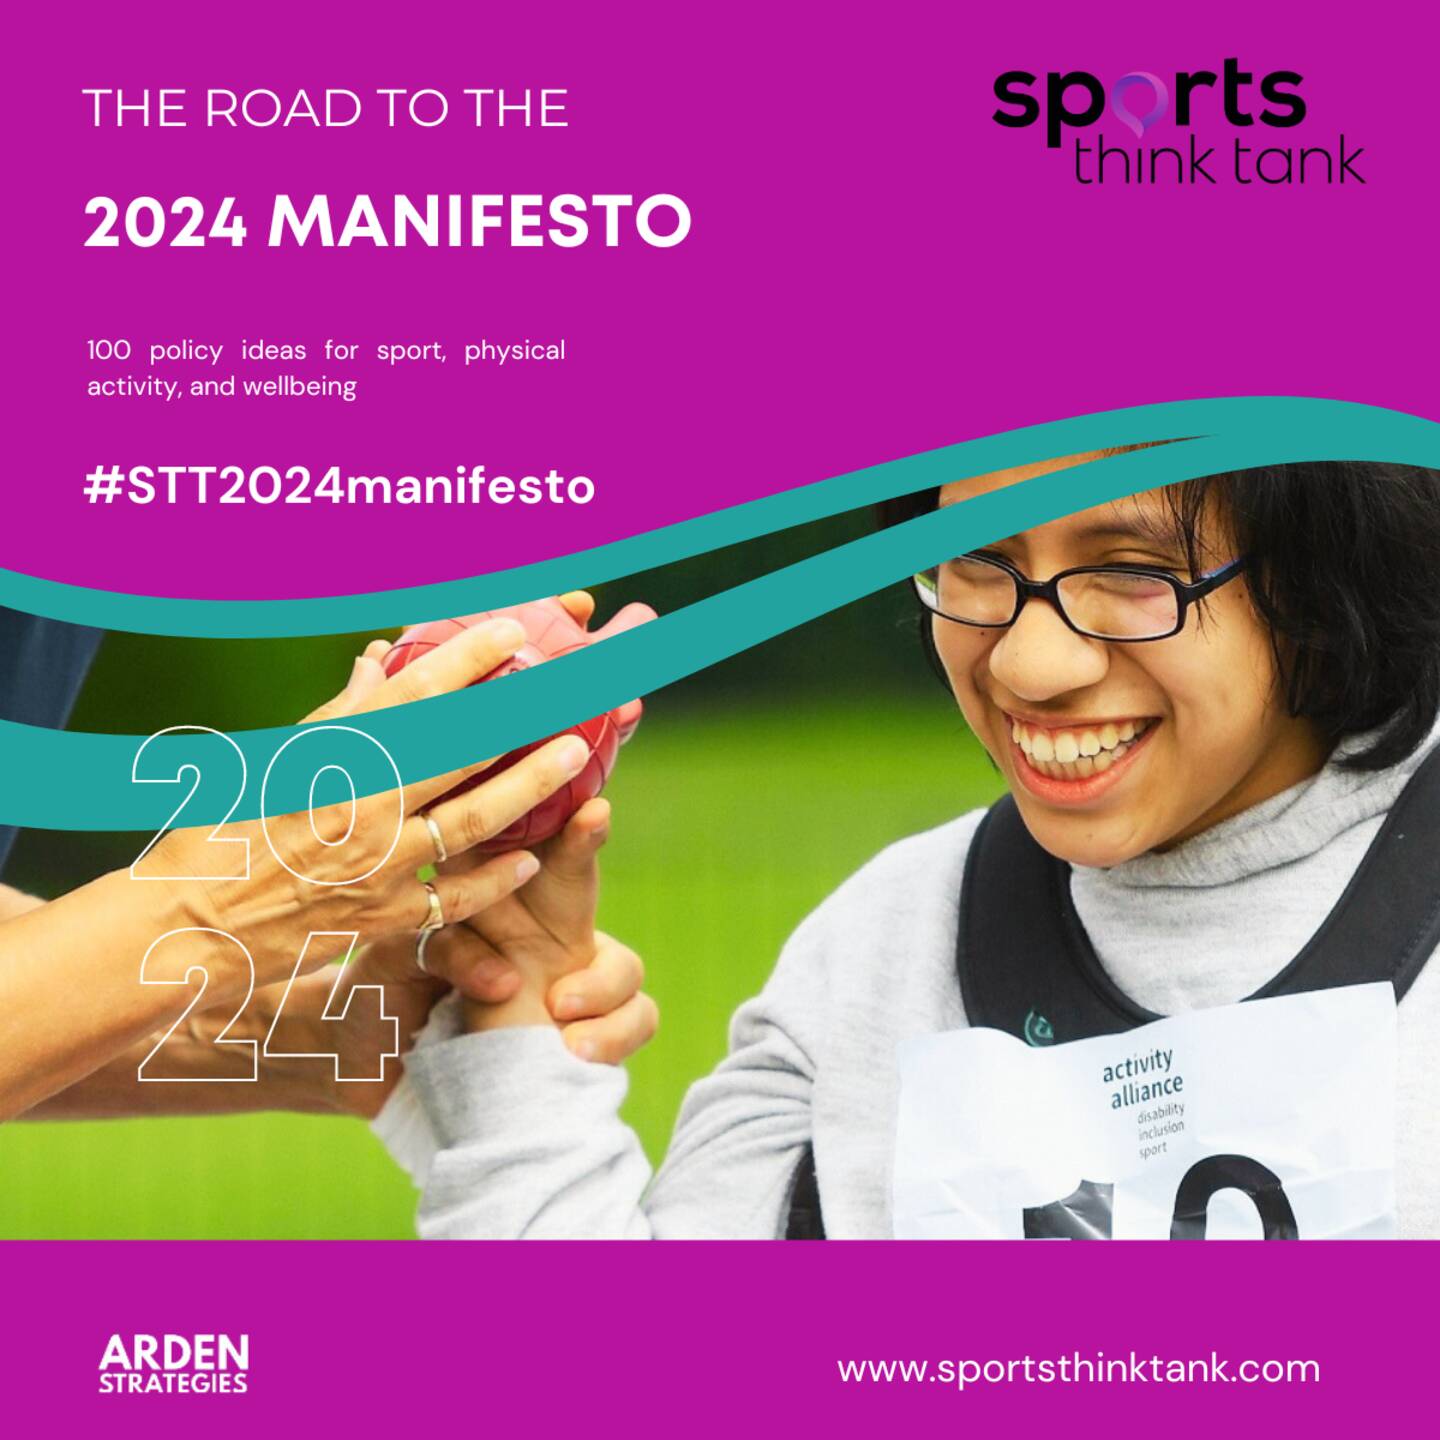 An image of a woman playing boccia with the Sports Think Tank logo on top. The words The Road to the 2024 Manifesto, policy ideas for sport, physical activity and wellbeing. 